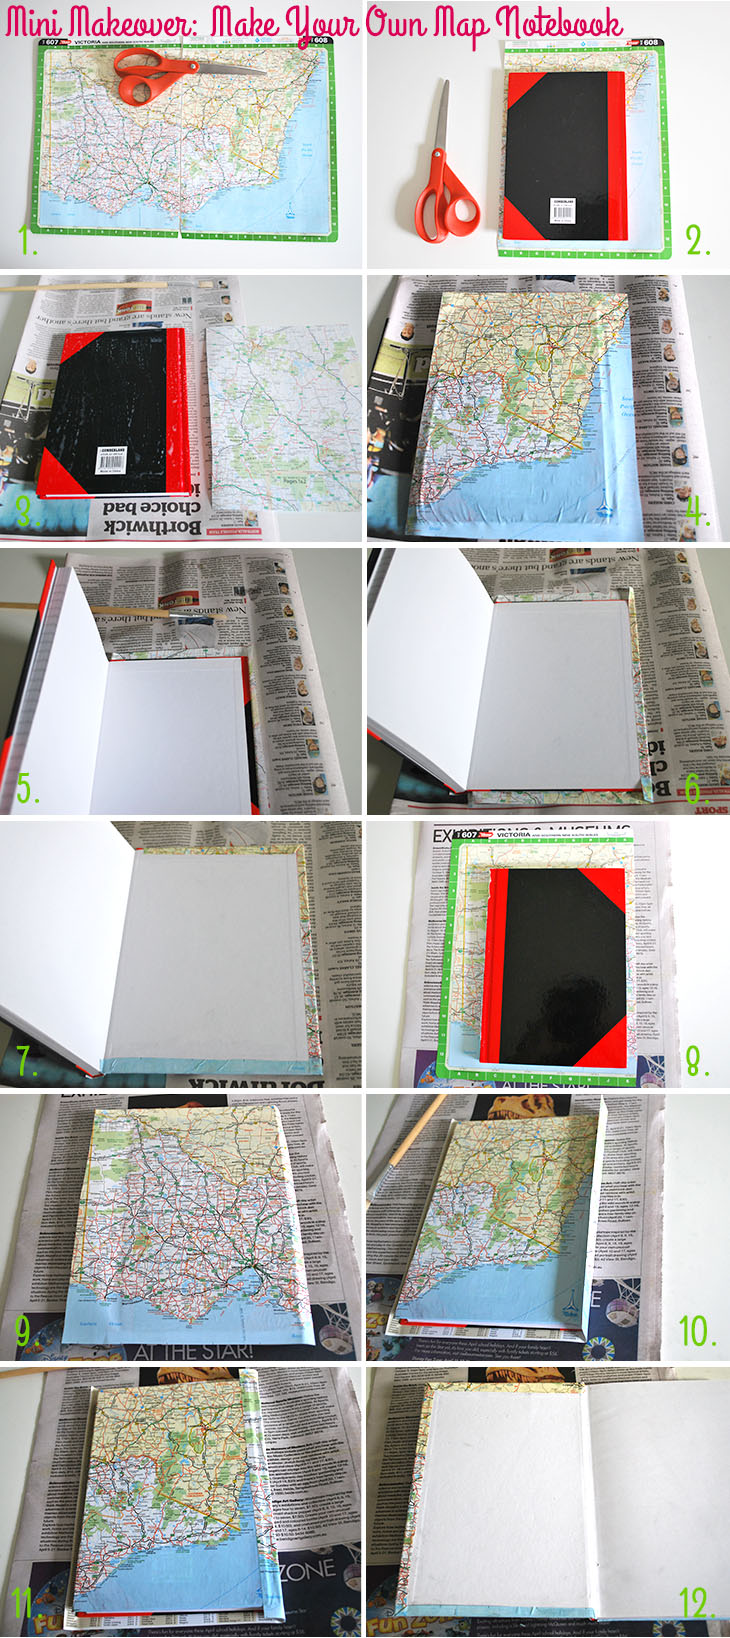 Mini Makeover: Make Your Own Map Notebook (step by step) on Style for a Happy Home